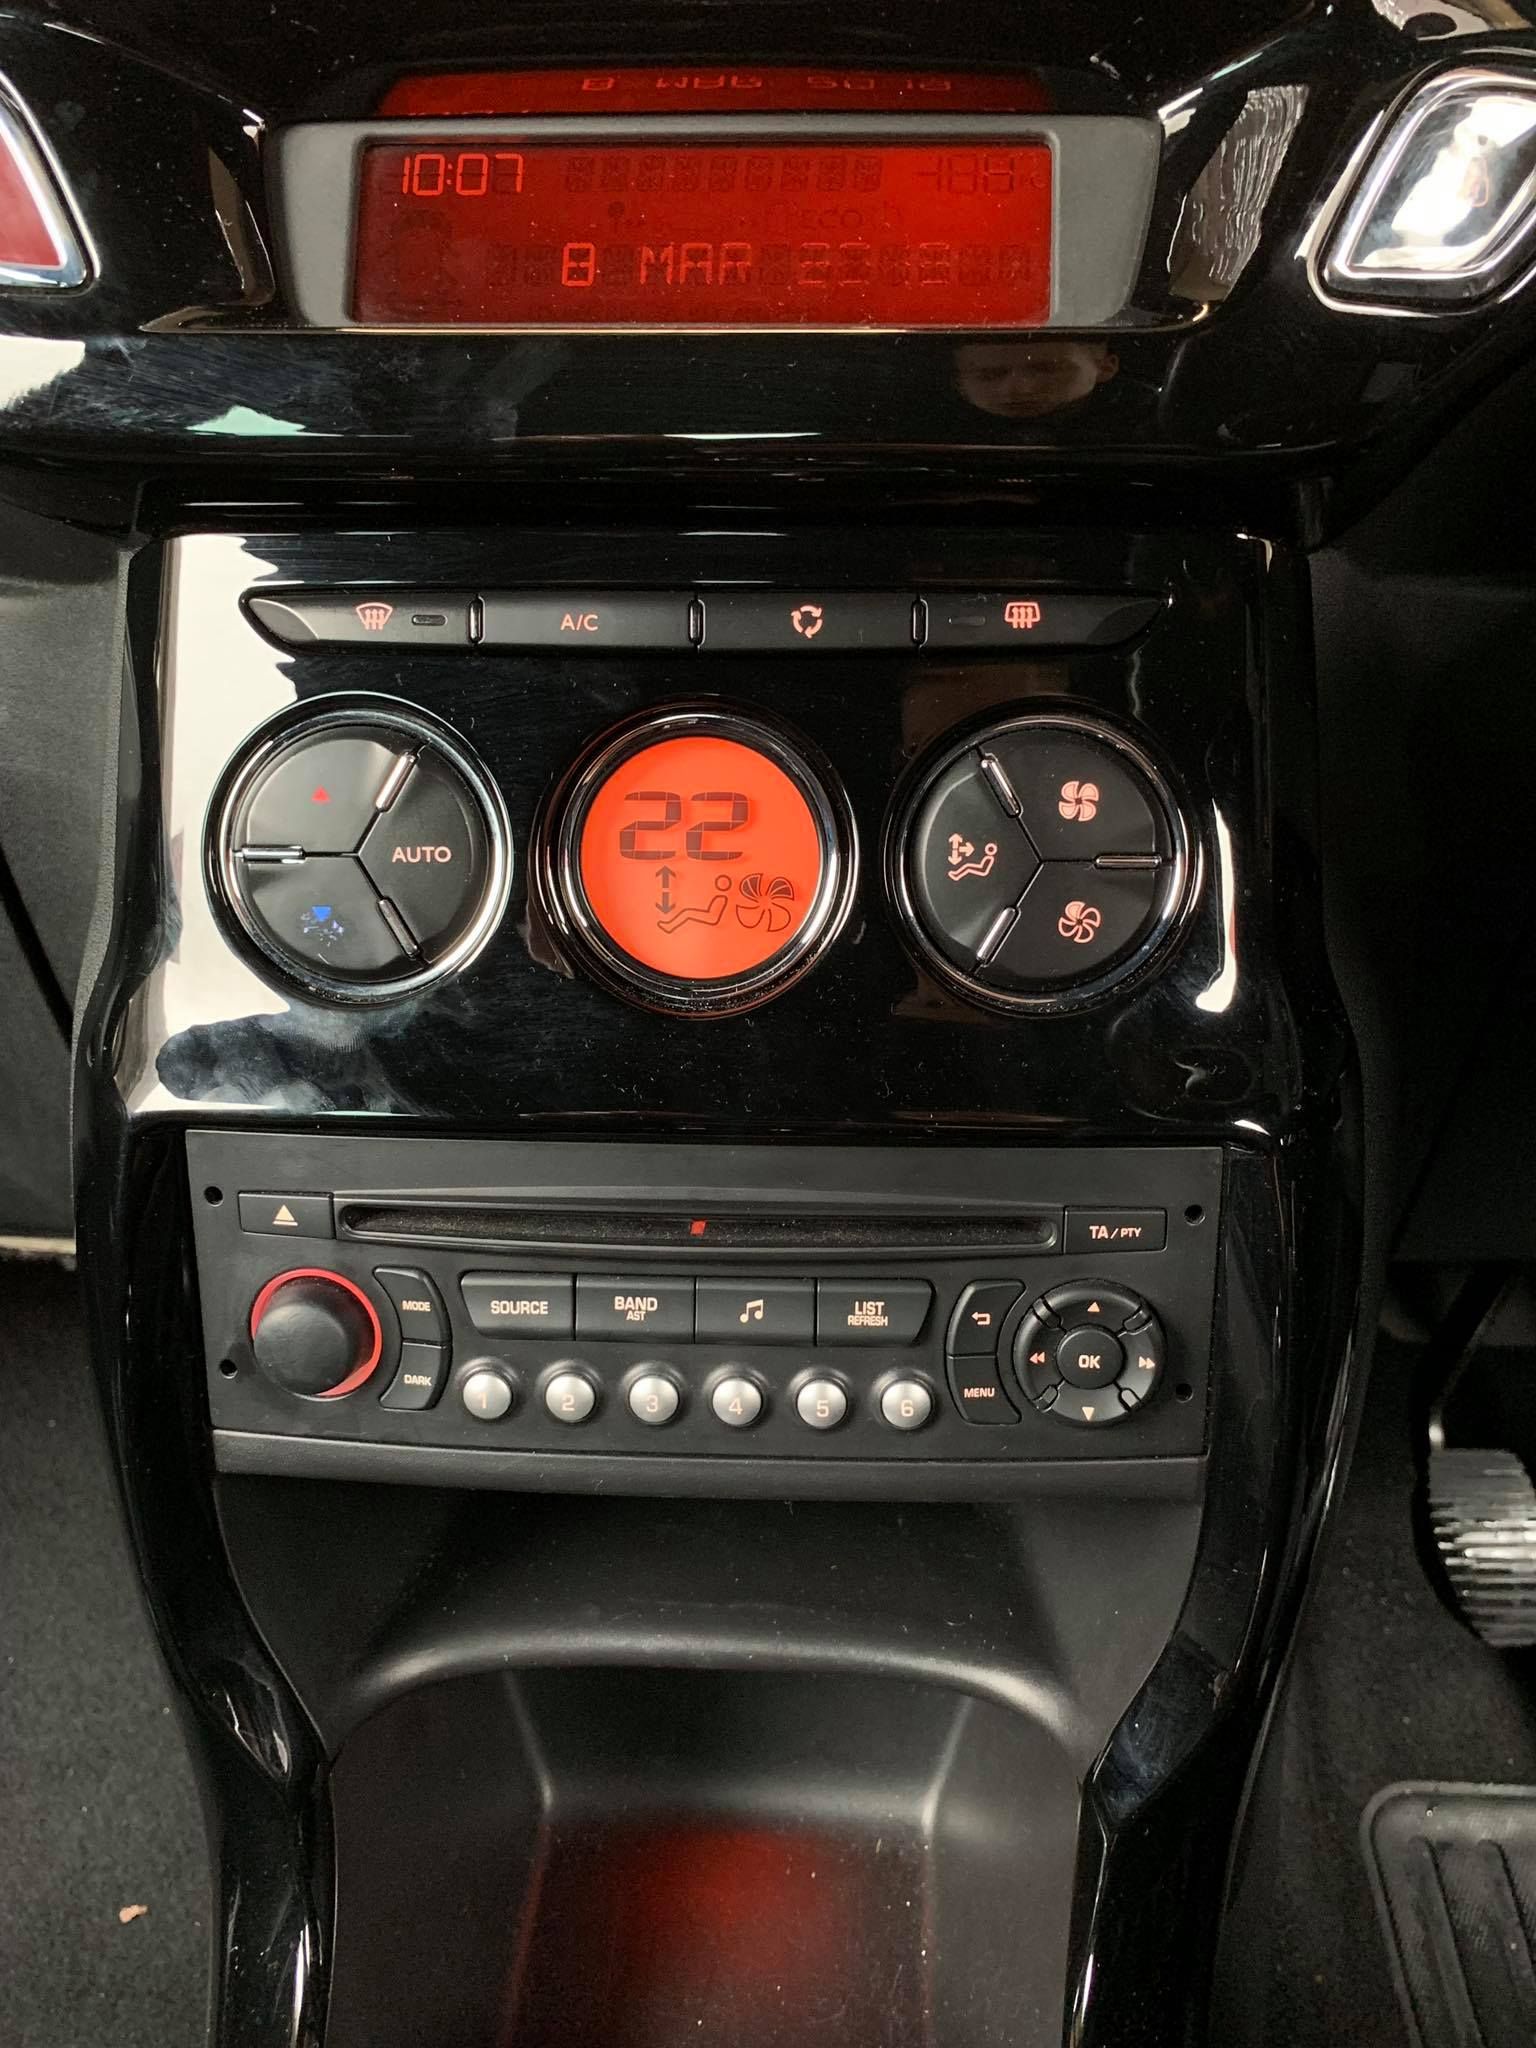 citreon ds3 before with old stereo